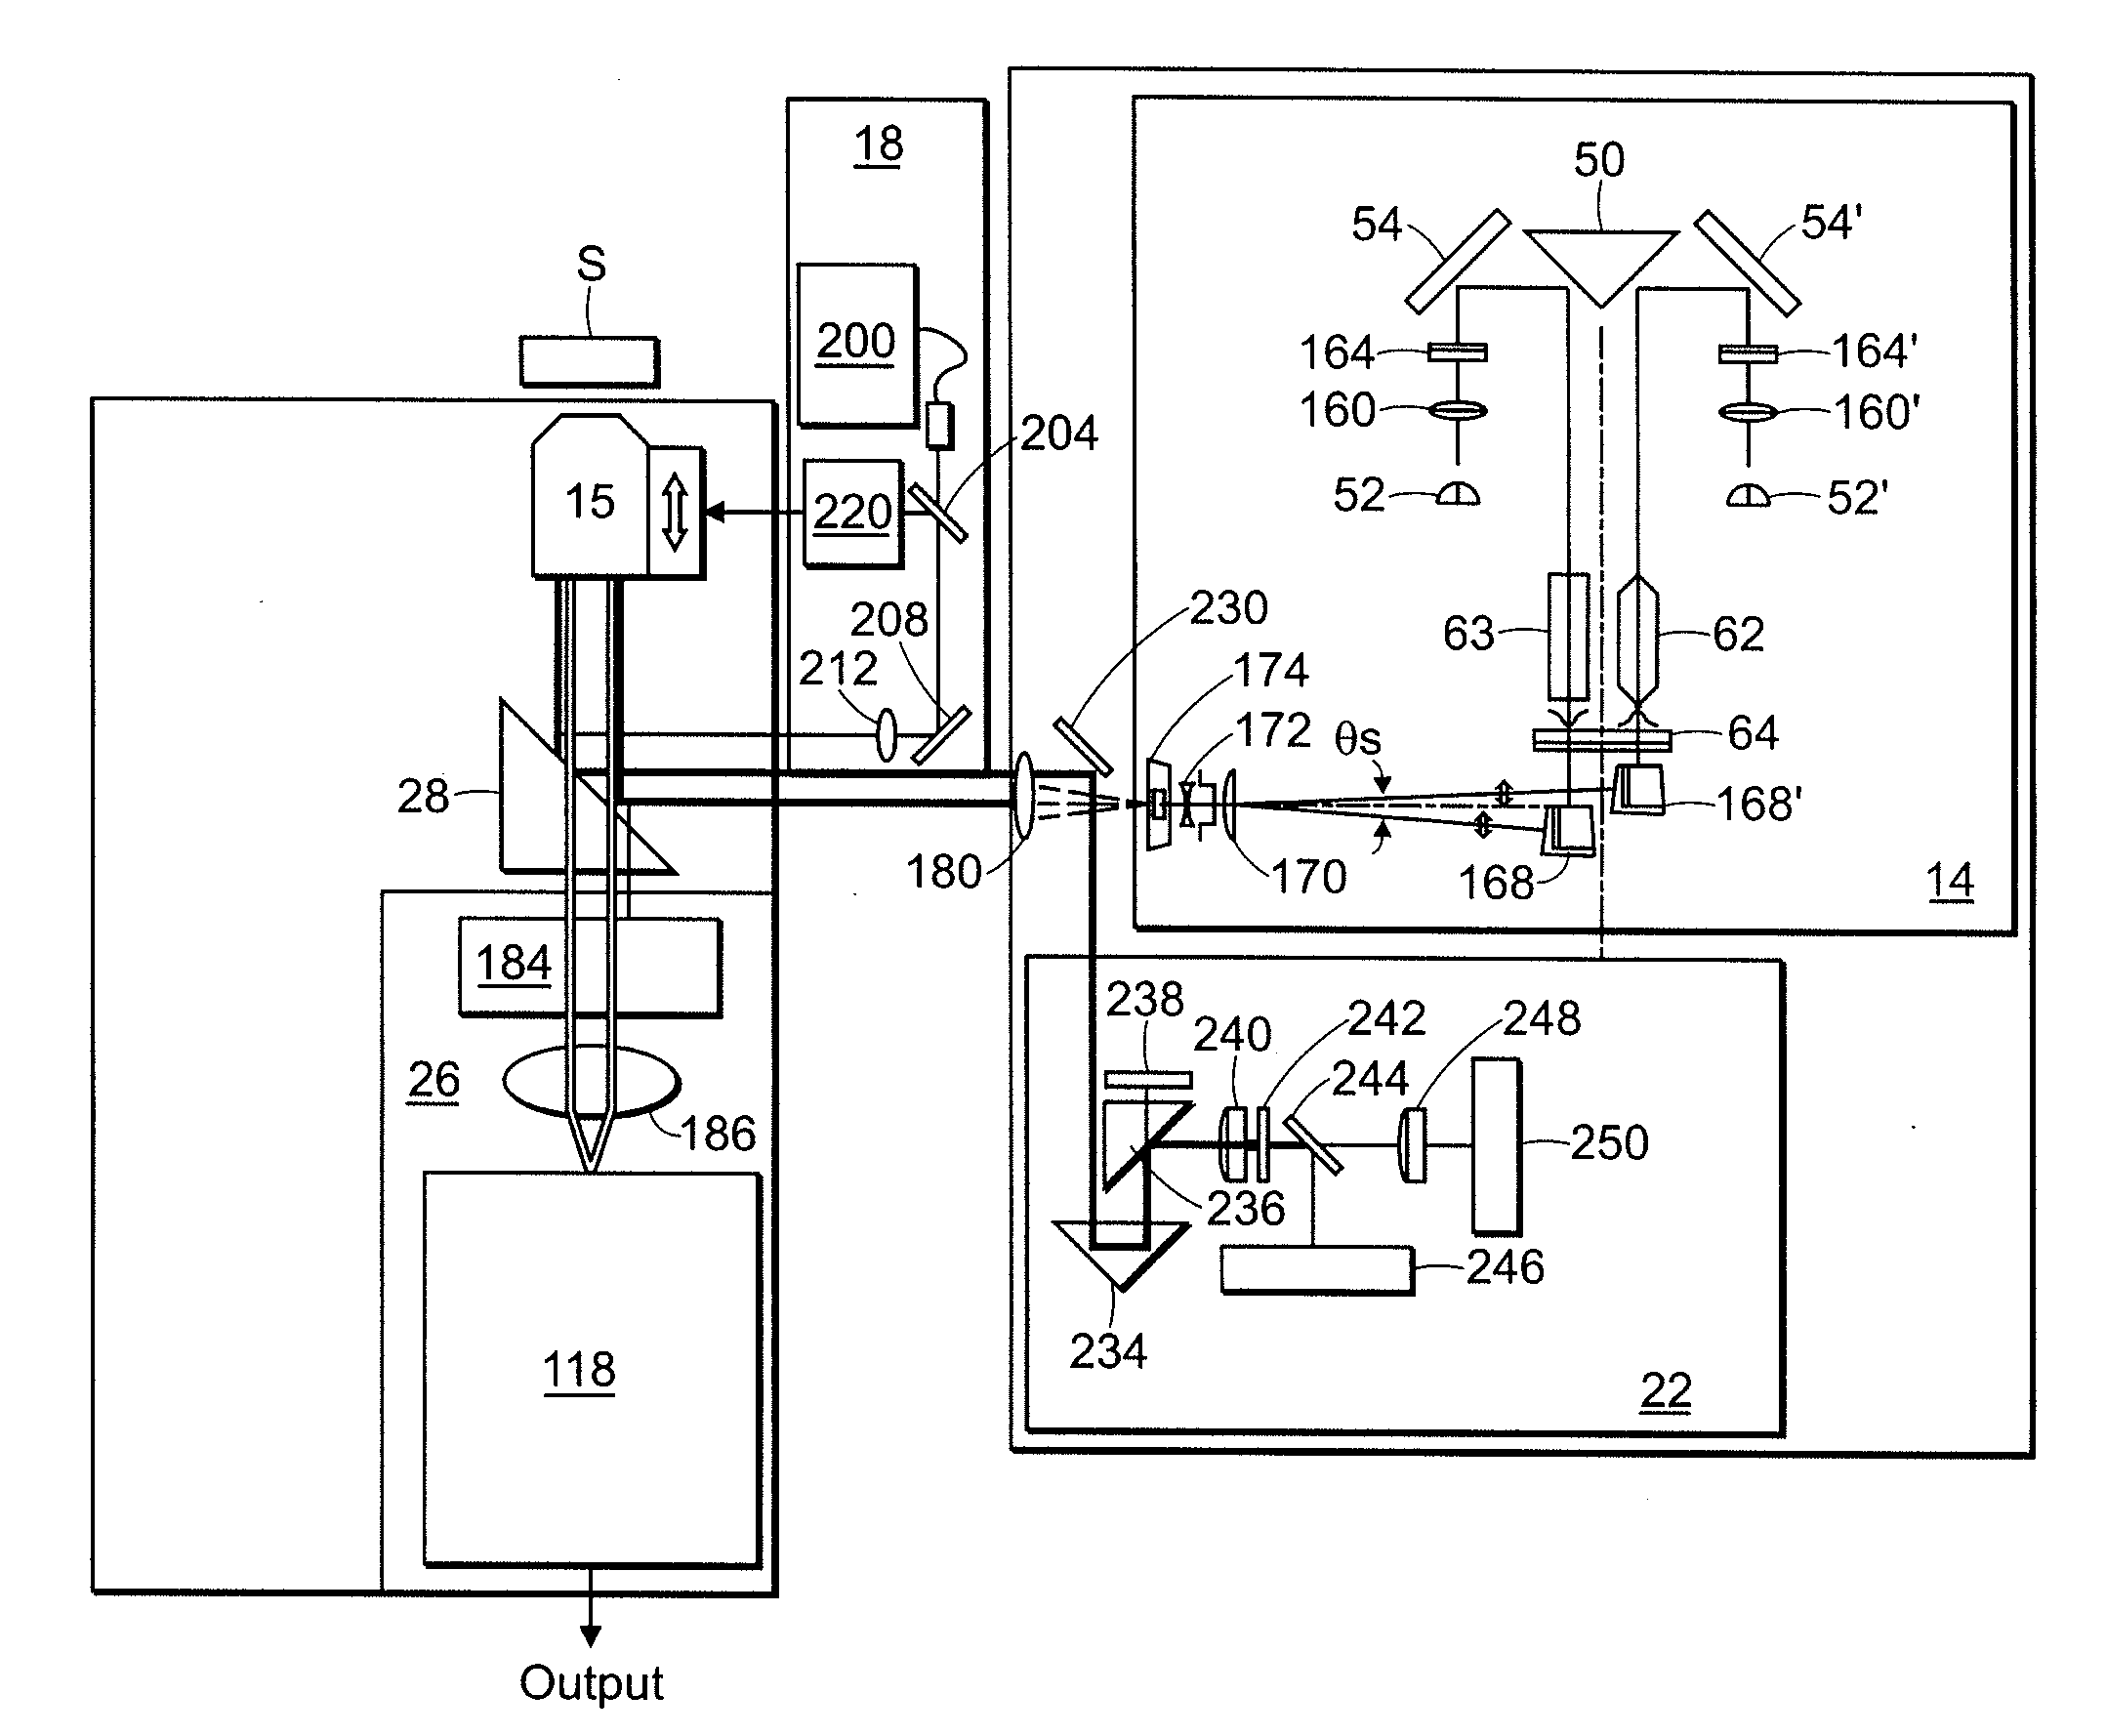 Optical apparatus and methods for chemical analysis